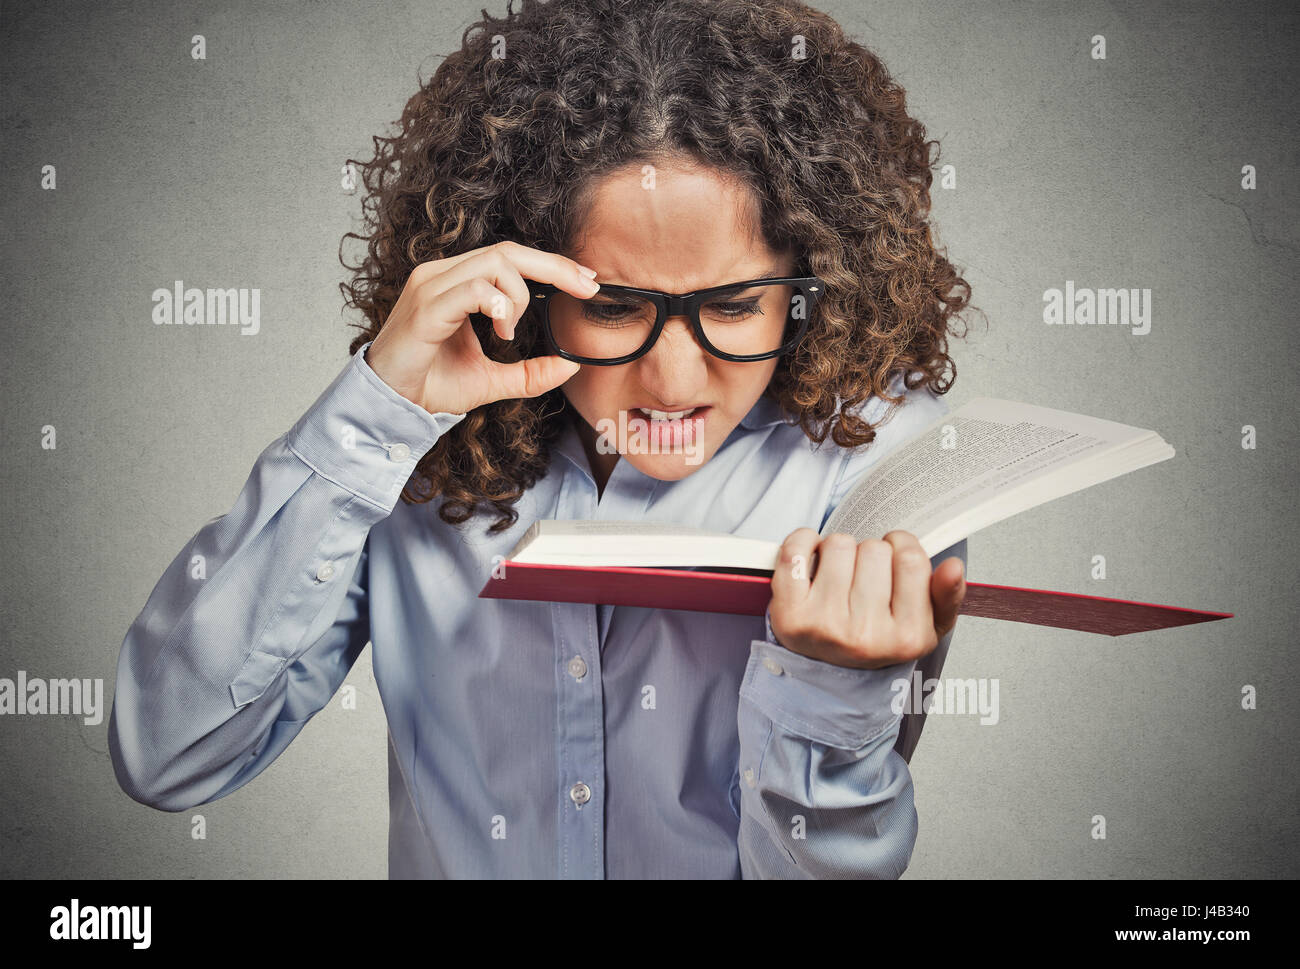 Closeup portrait young woman with eye glasses trying to read book, having difficulties seeing text, bad vision sight problem isolated grey background. Stock Photo